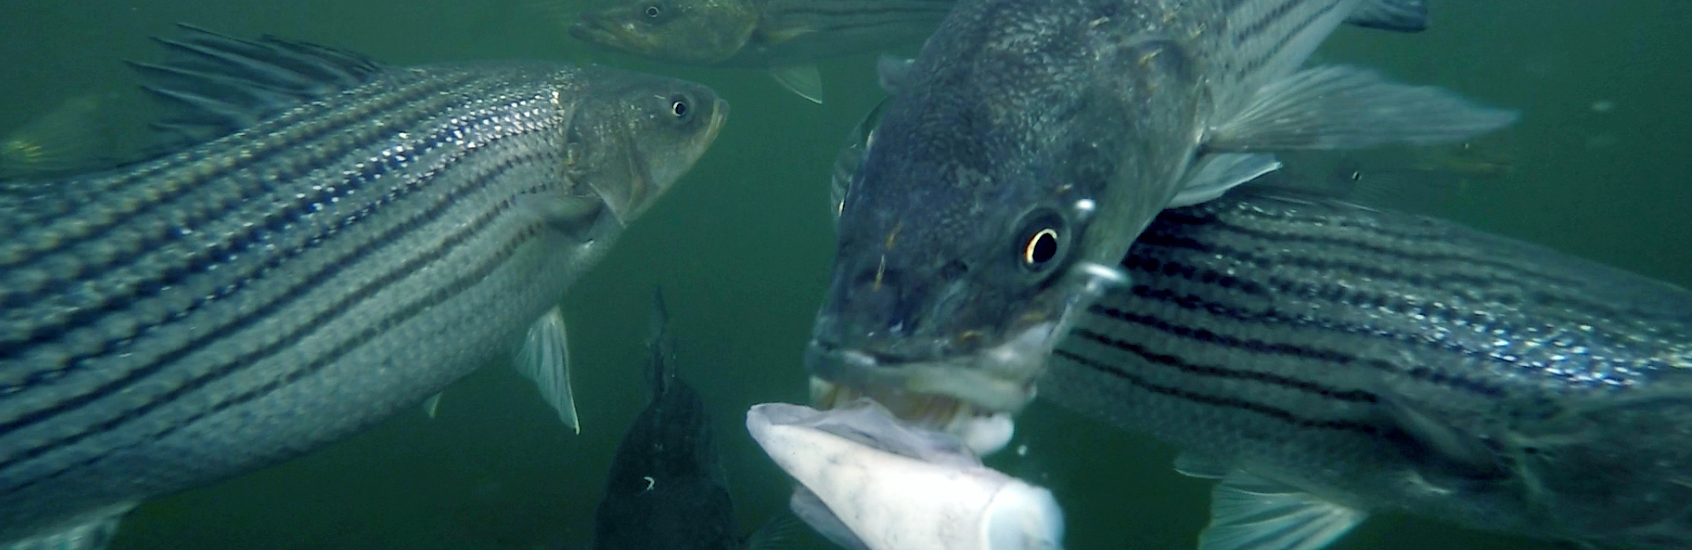 Underwater photo of striped bass eating capelin. Credit: Steve Zottoli